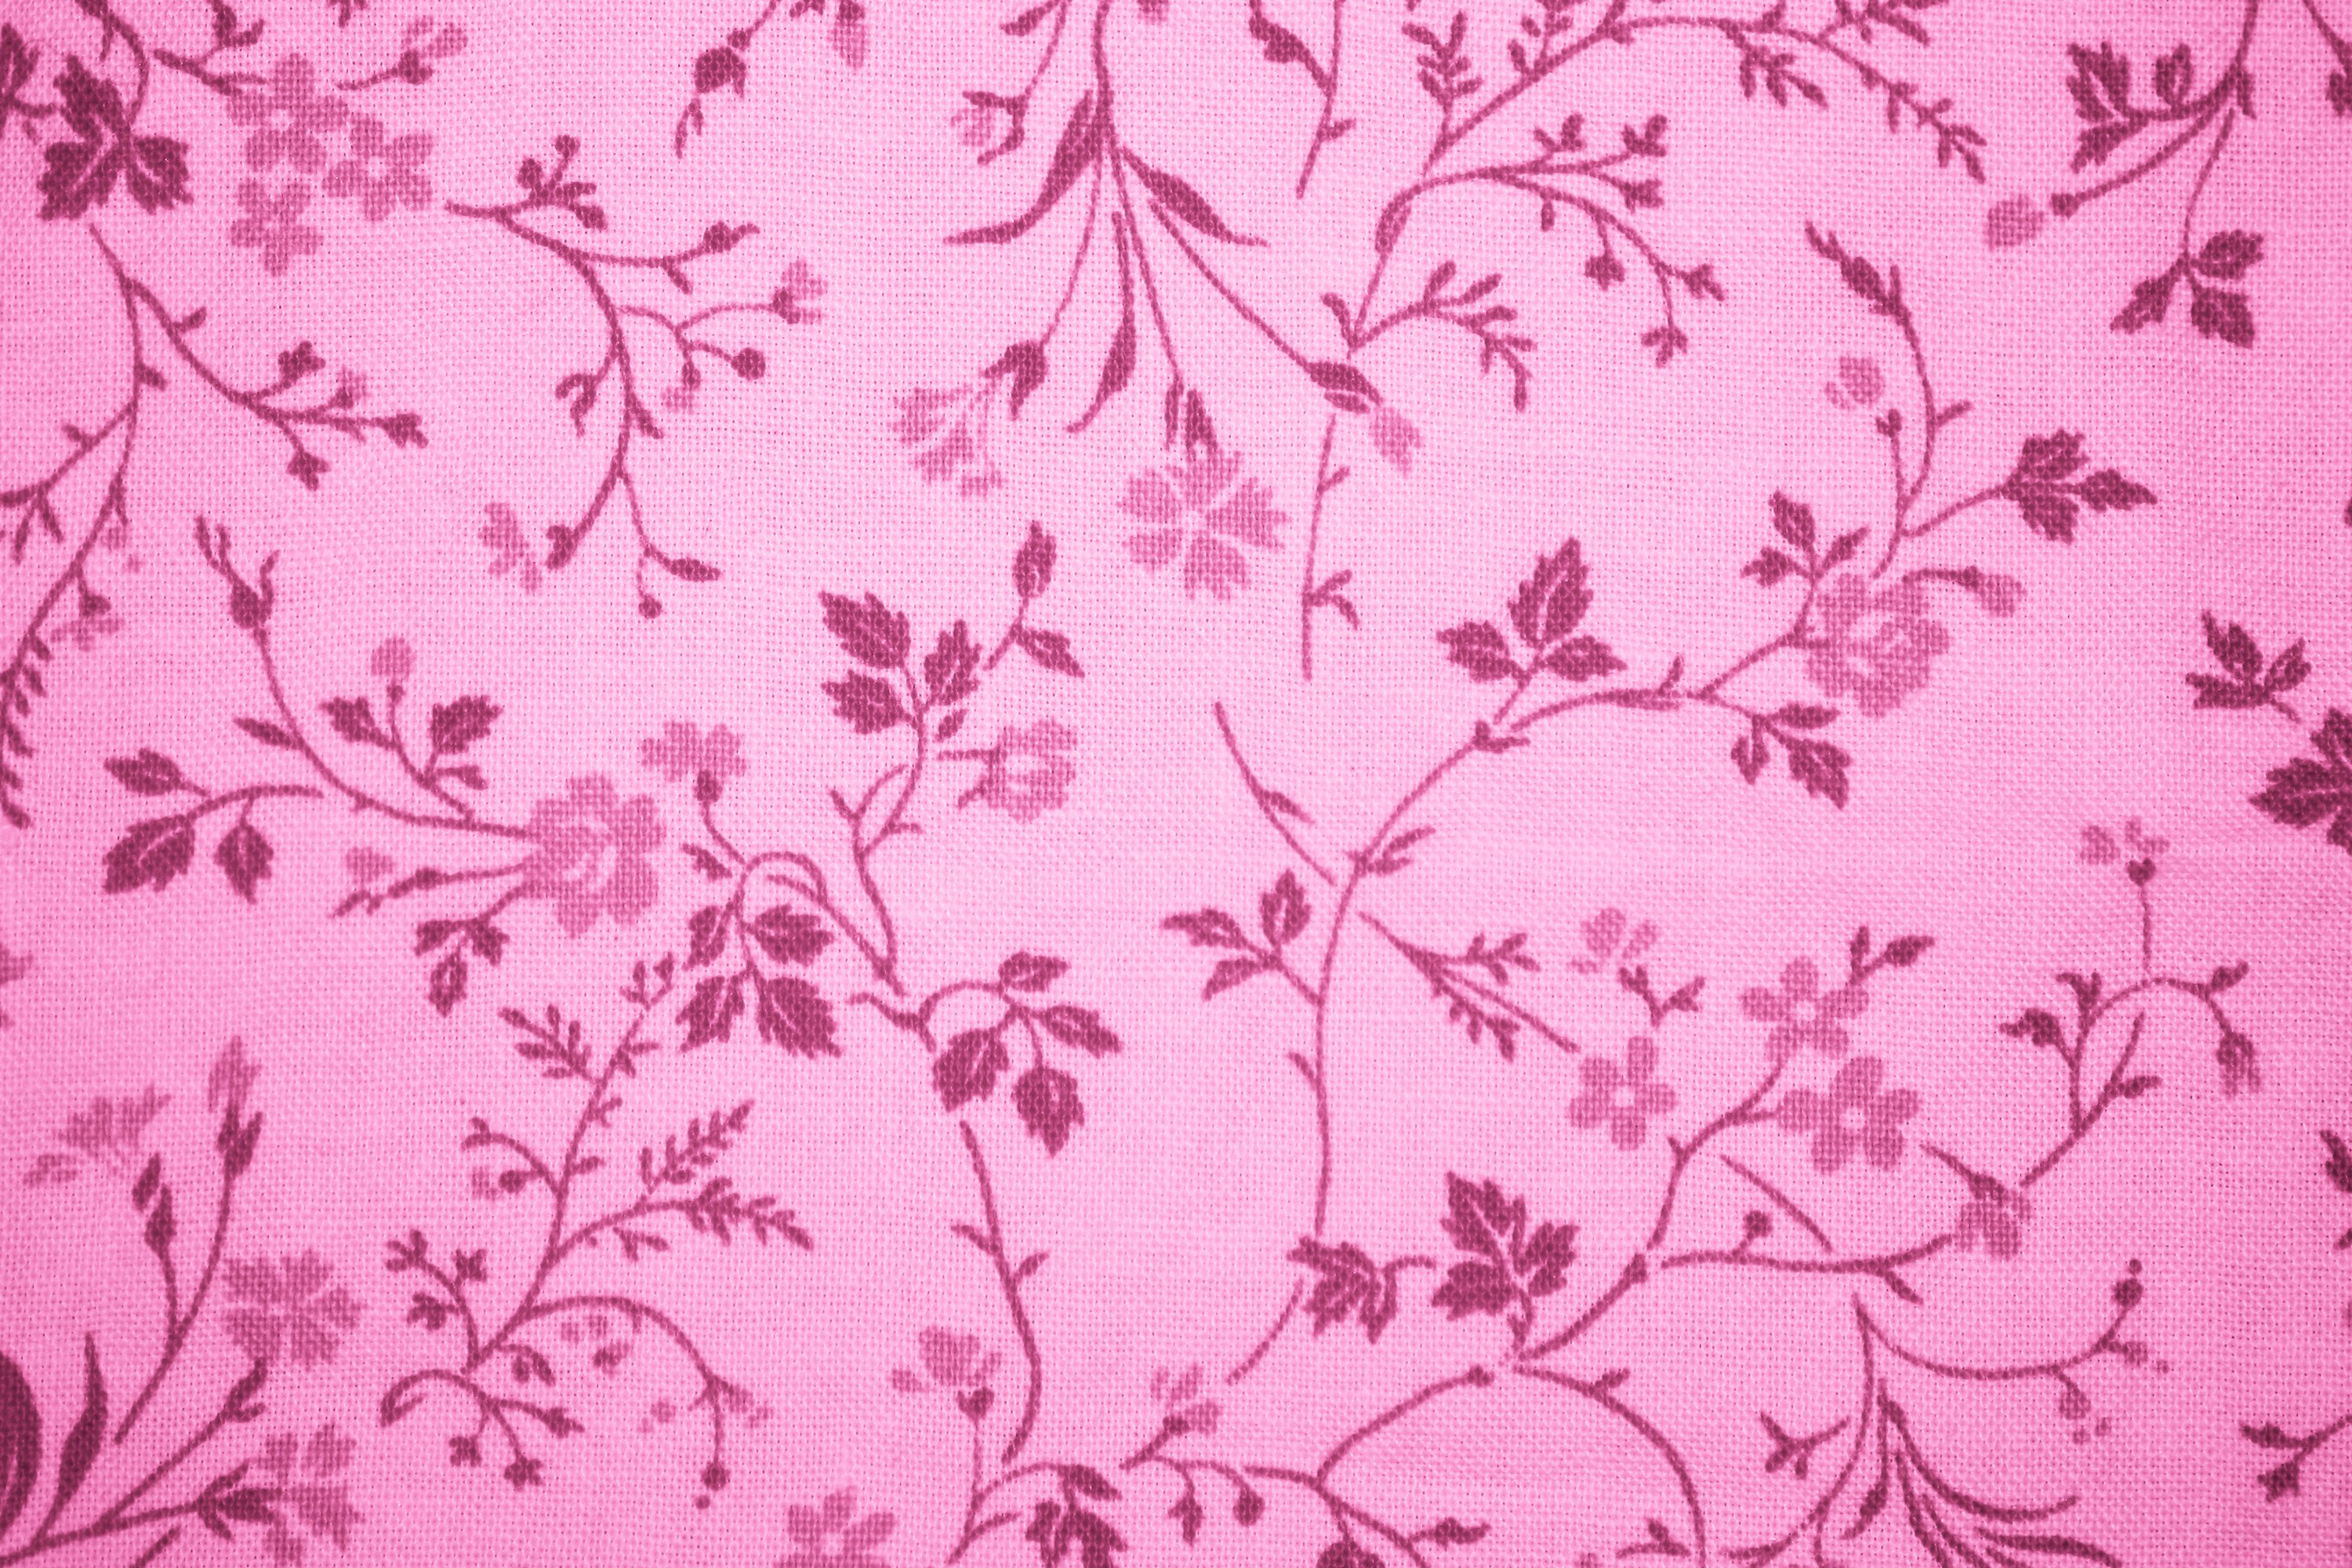 Pink Floral Print Fabric Texture Picture Photograph Photos